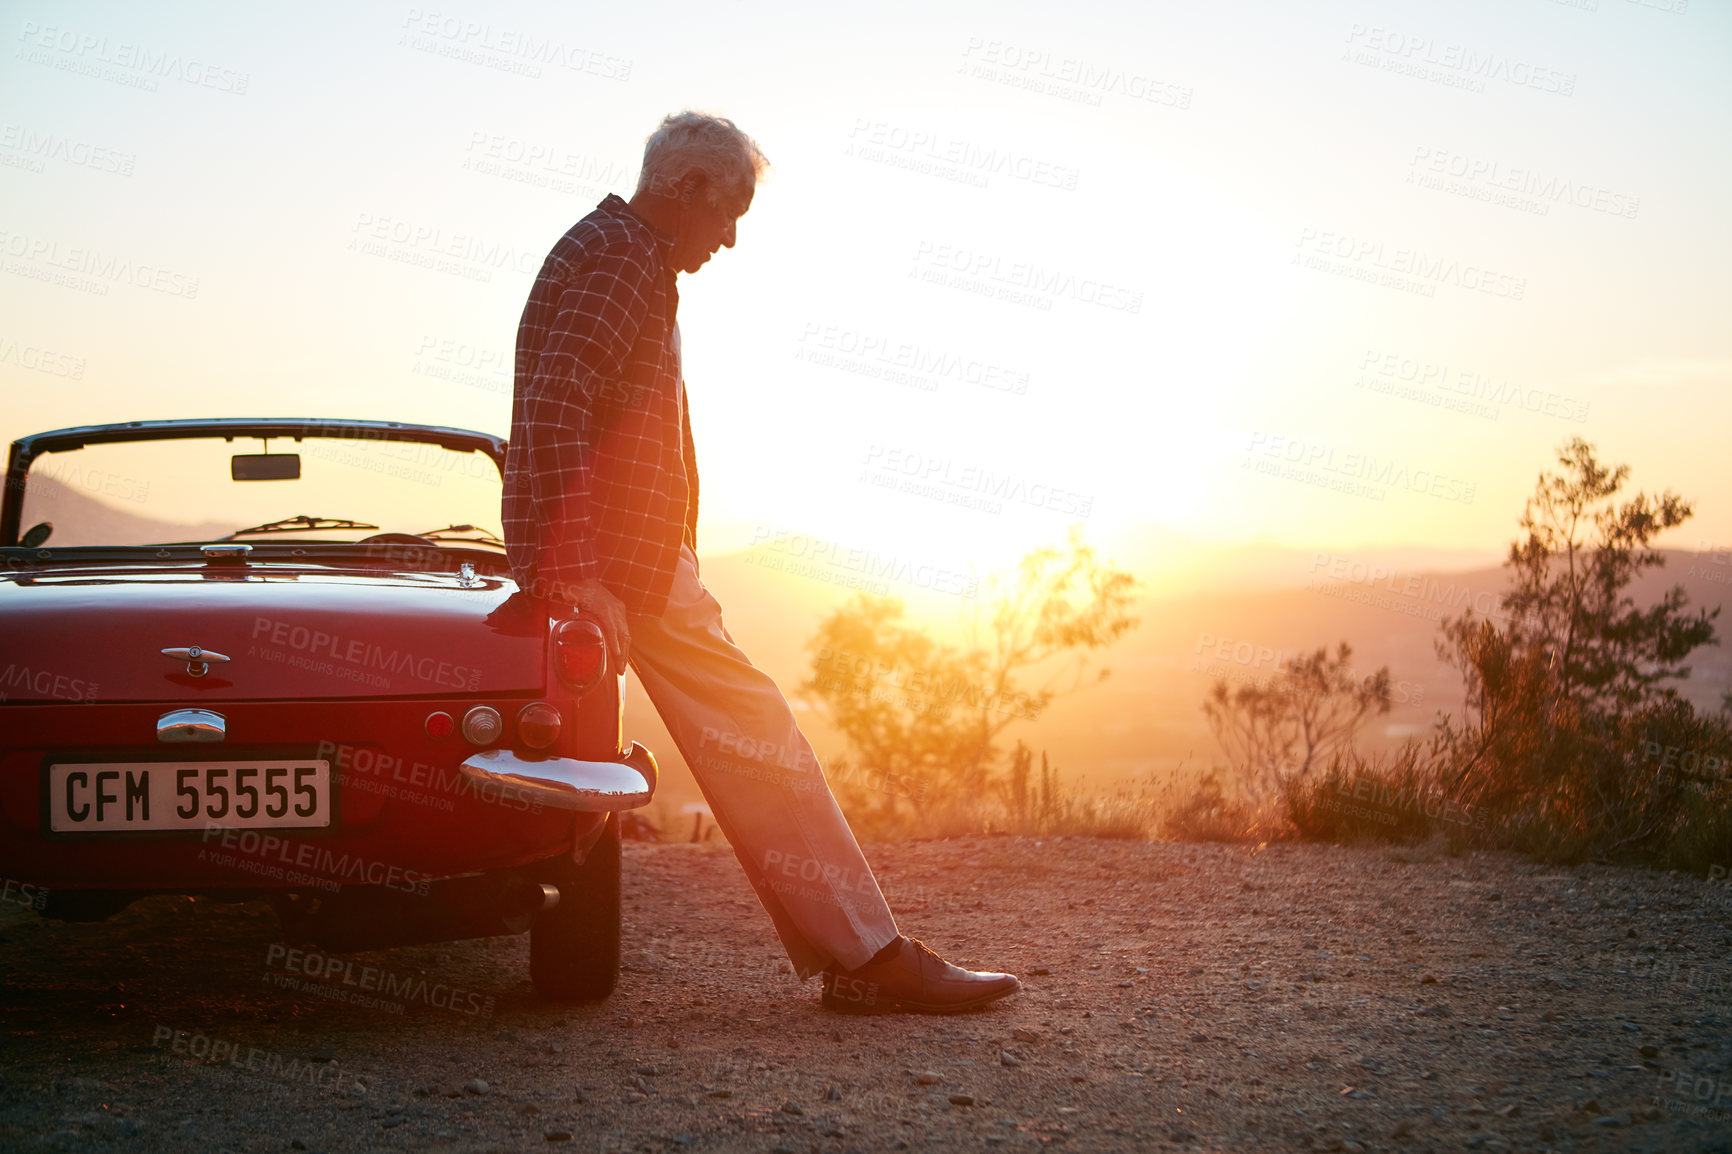 Buy stock photo Shot of a senior man out on a road trip